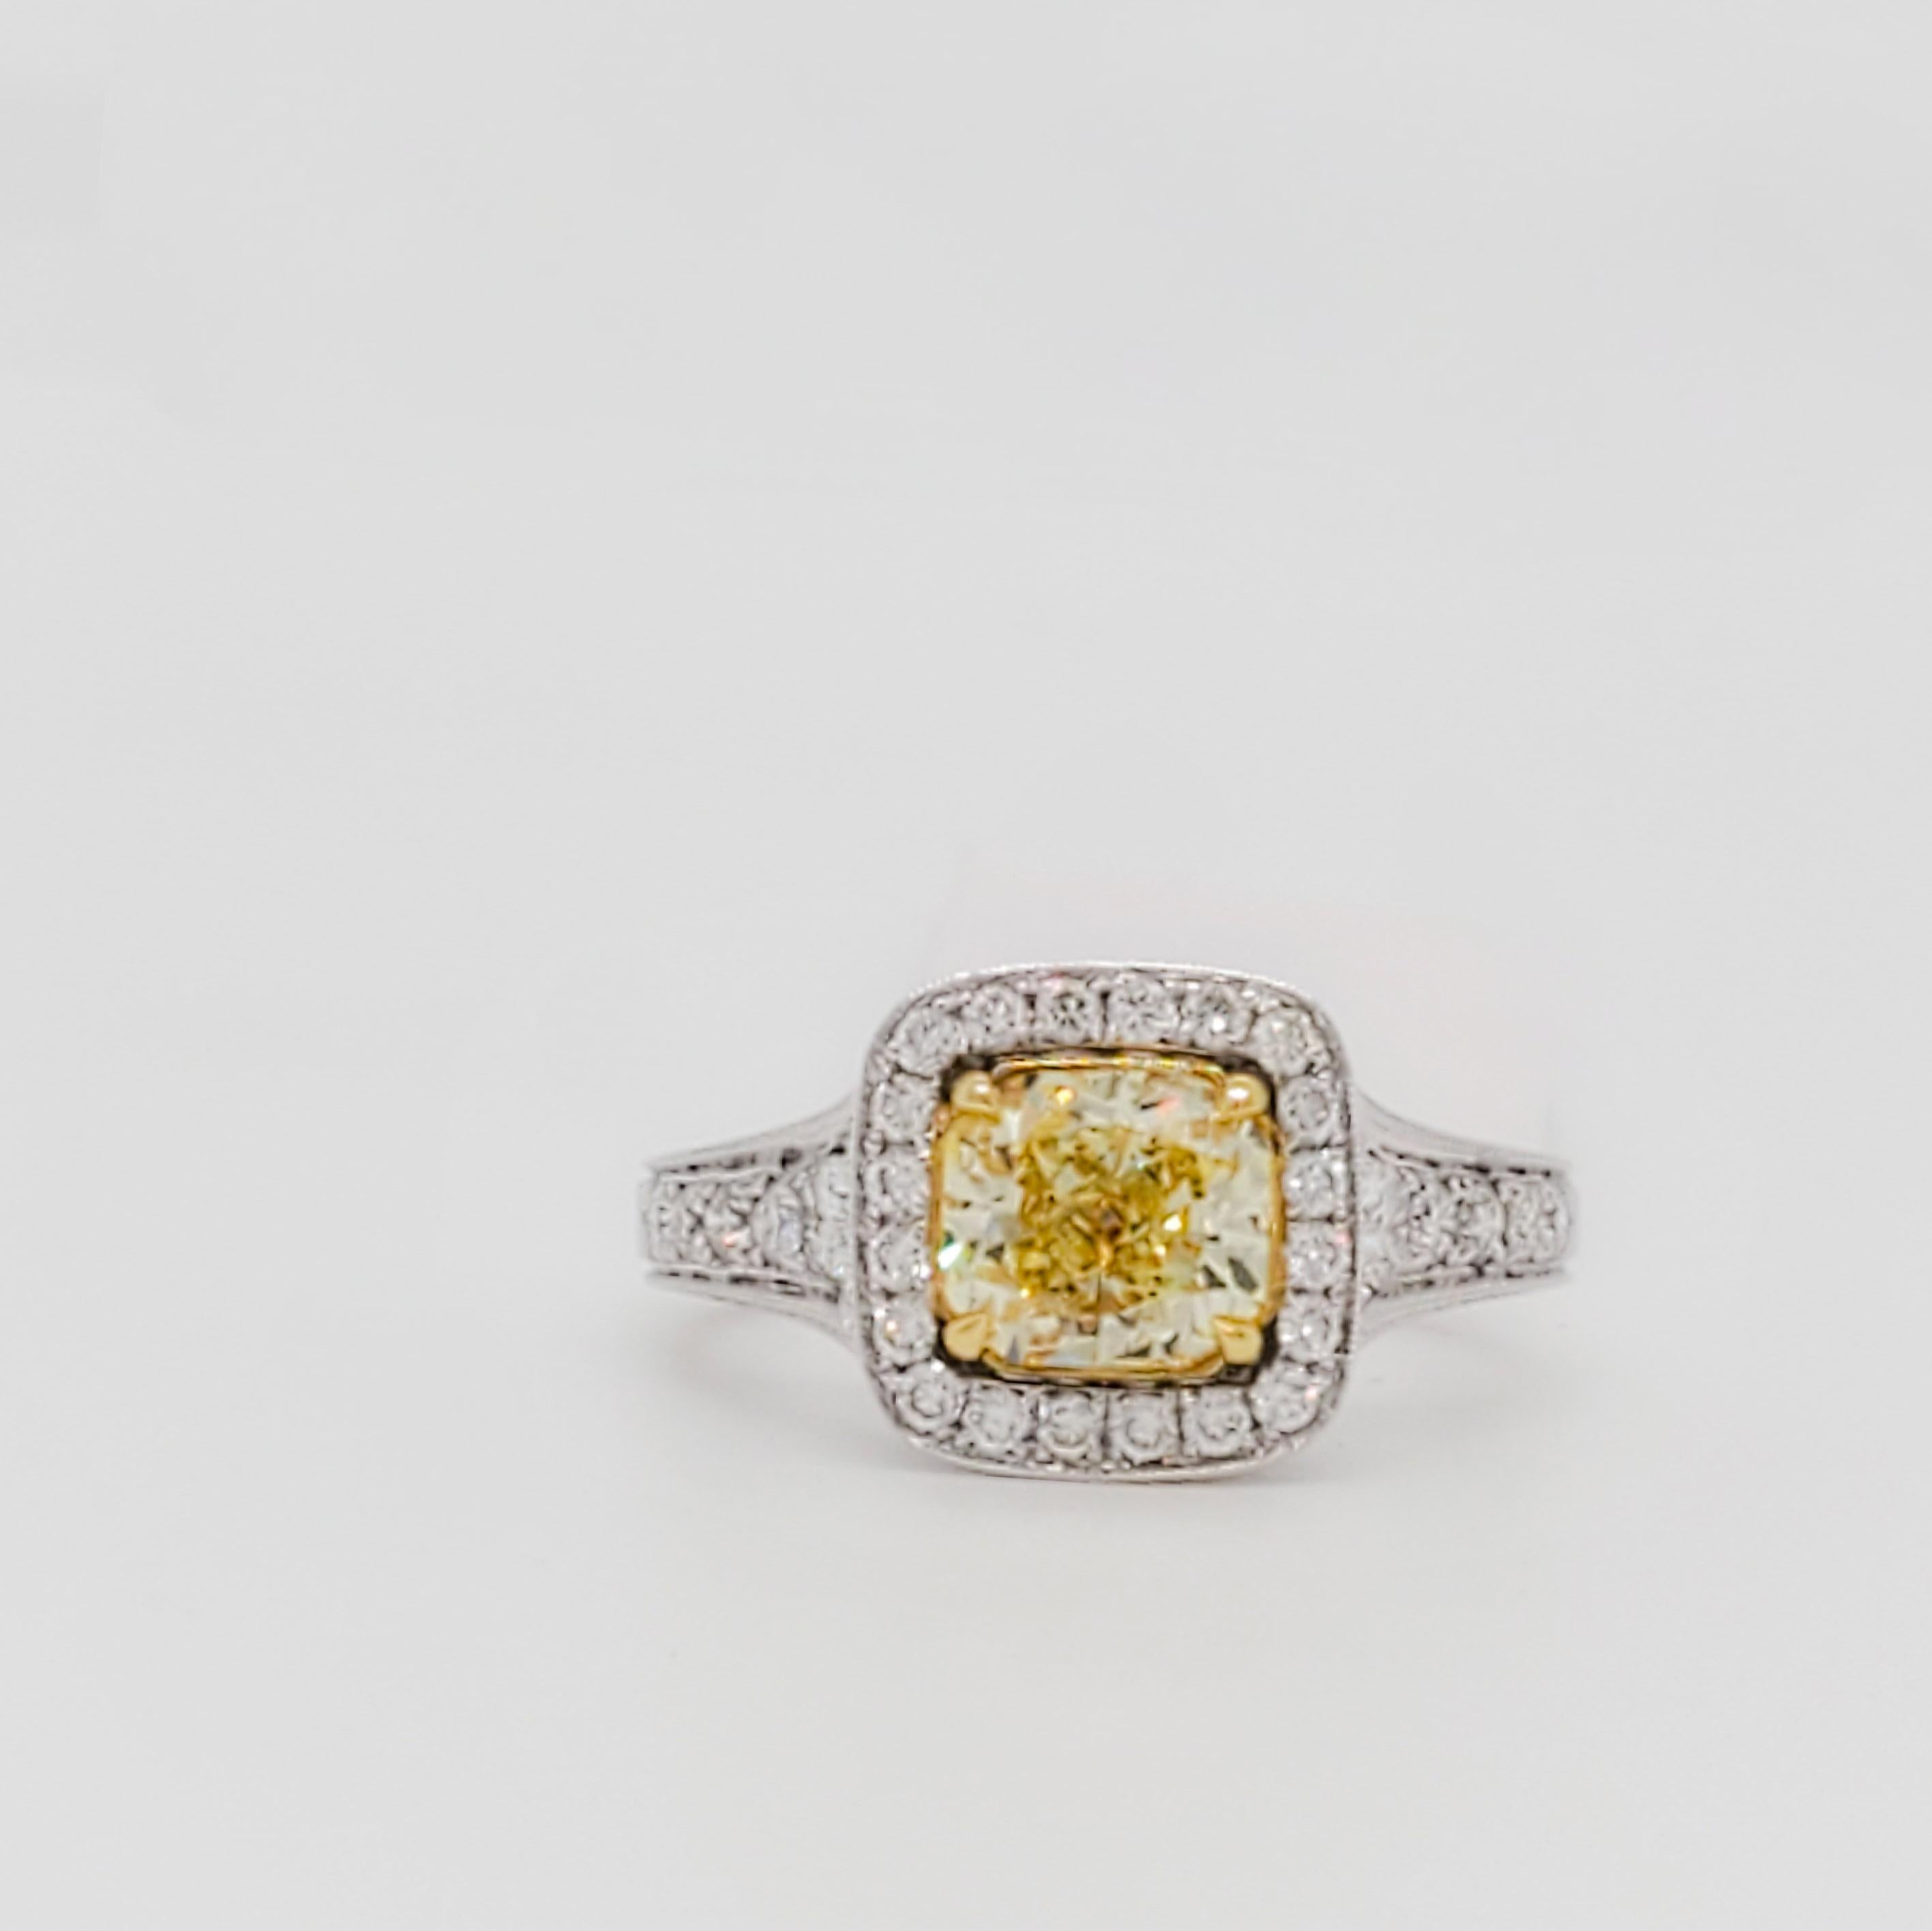 Beautiful 1.44 ct. GIA fancy yellow diamond radiant with 0.45 ct. good quality white diamond rounds.  Handmade in 18k yellow and white gold.  Ring size 